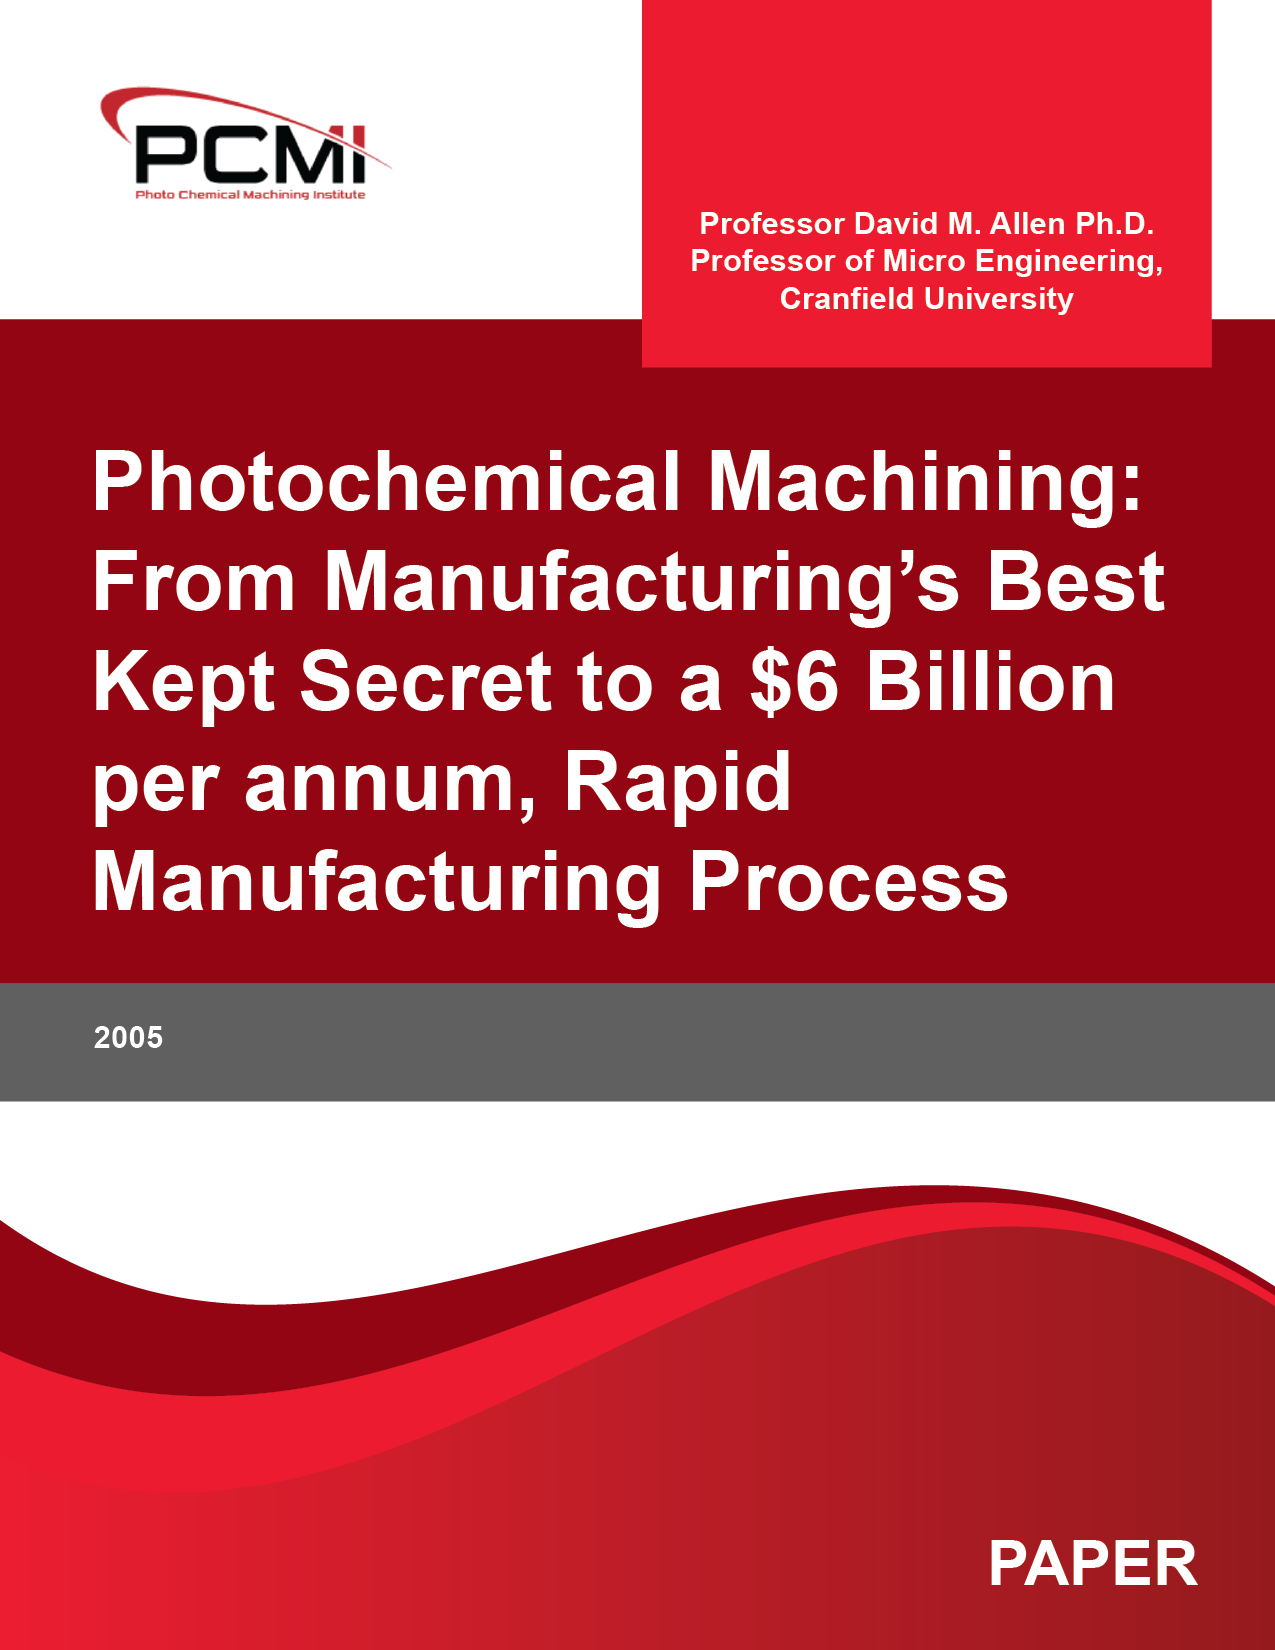 Photochemical Machining: From Manufacturing’s Best Kept Secret to a $6 Billion per annum, Rapid Manufacturing Process